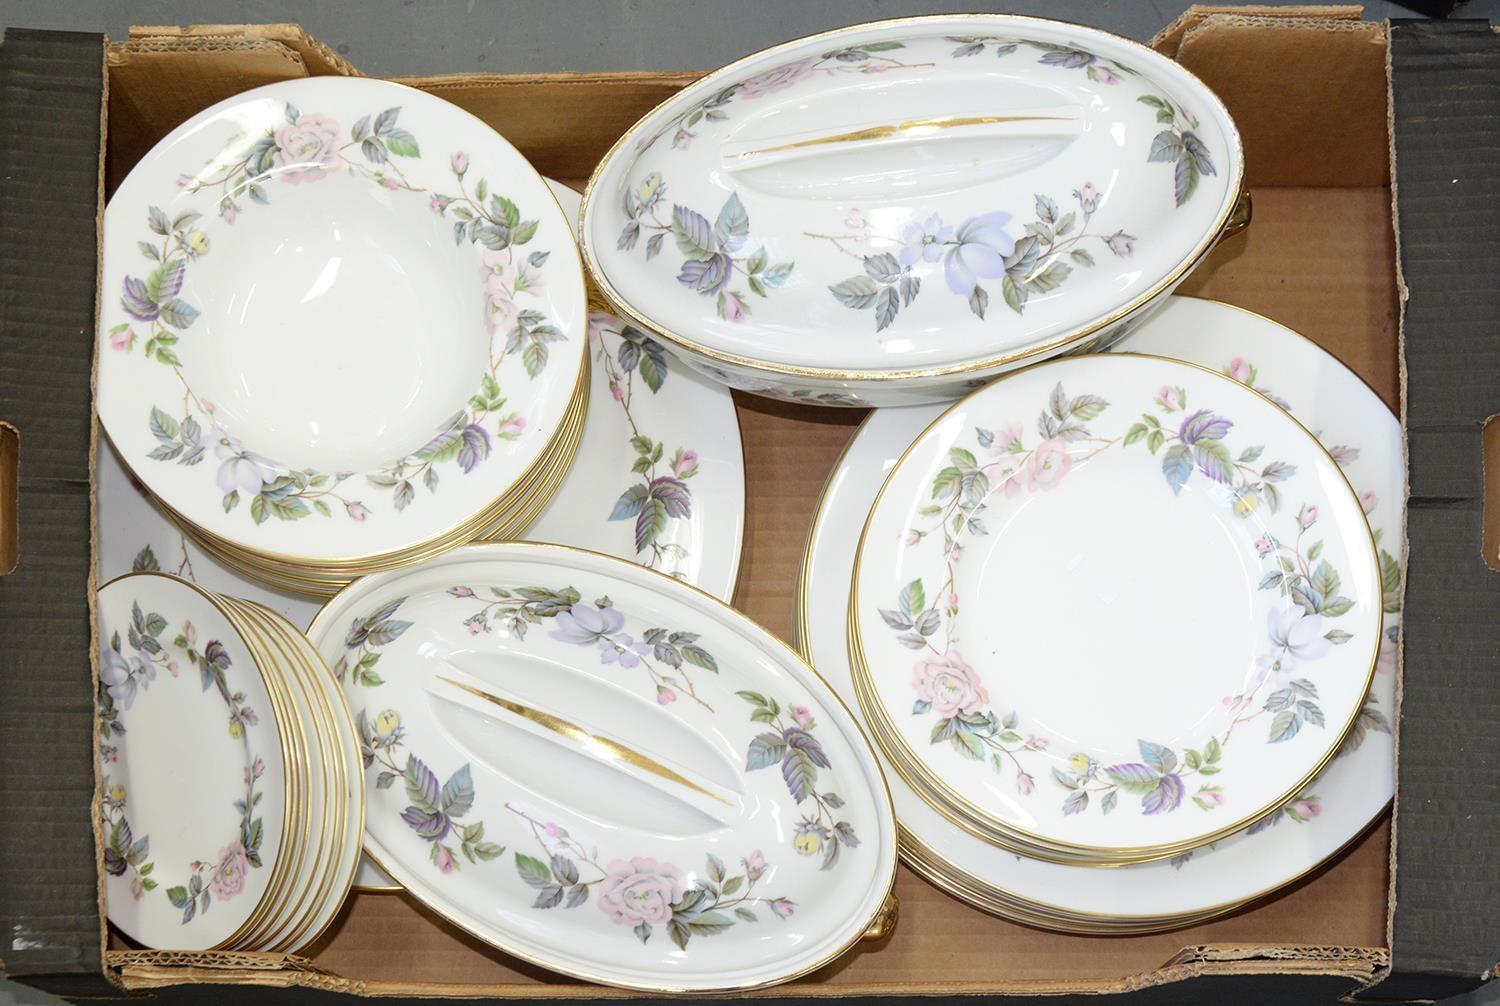 A ROYAL WORCESTER BONE CHINA JUNE GARLAND PATTERN DINNER SERVICE, PRINTED MARK Condition report